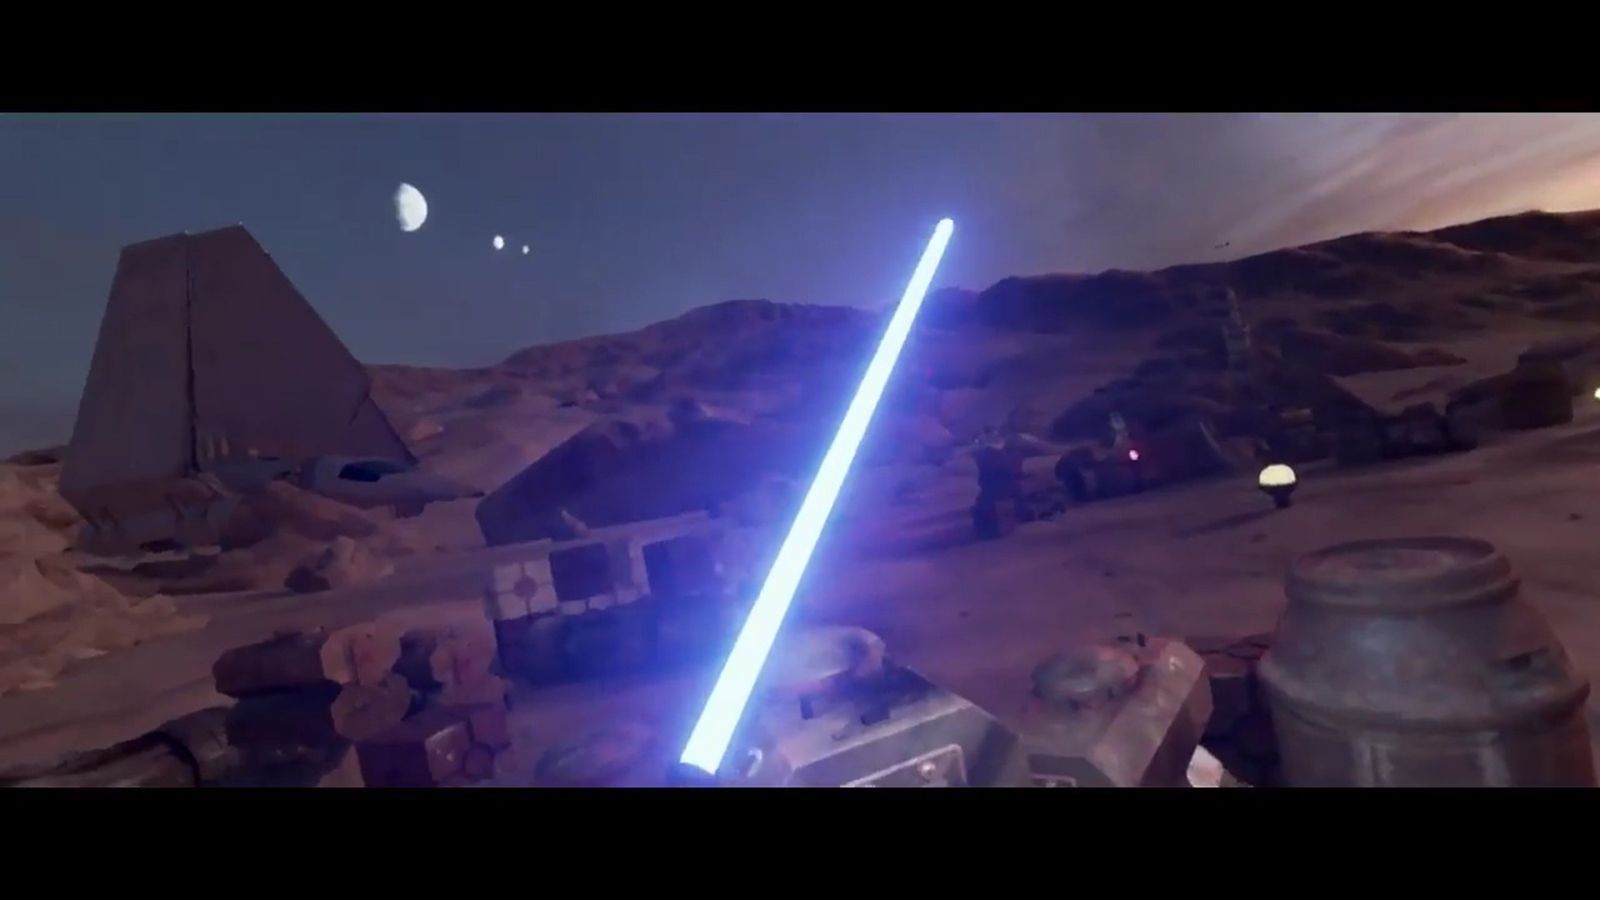 experience star wars in lightsaber swinging vr soon on the htc vive trailer arrives image 1